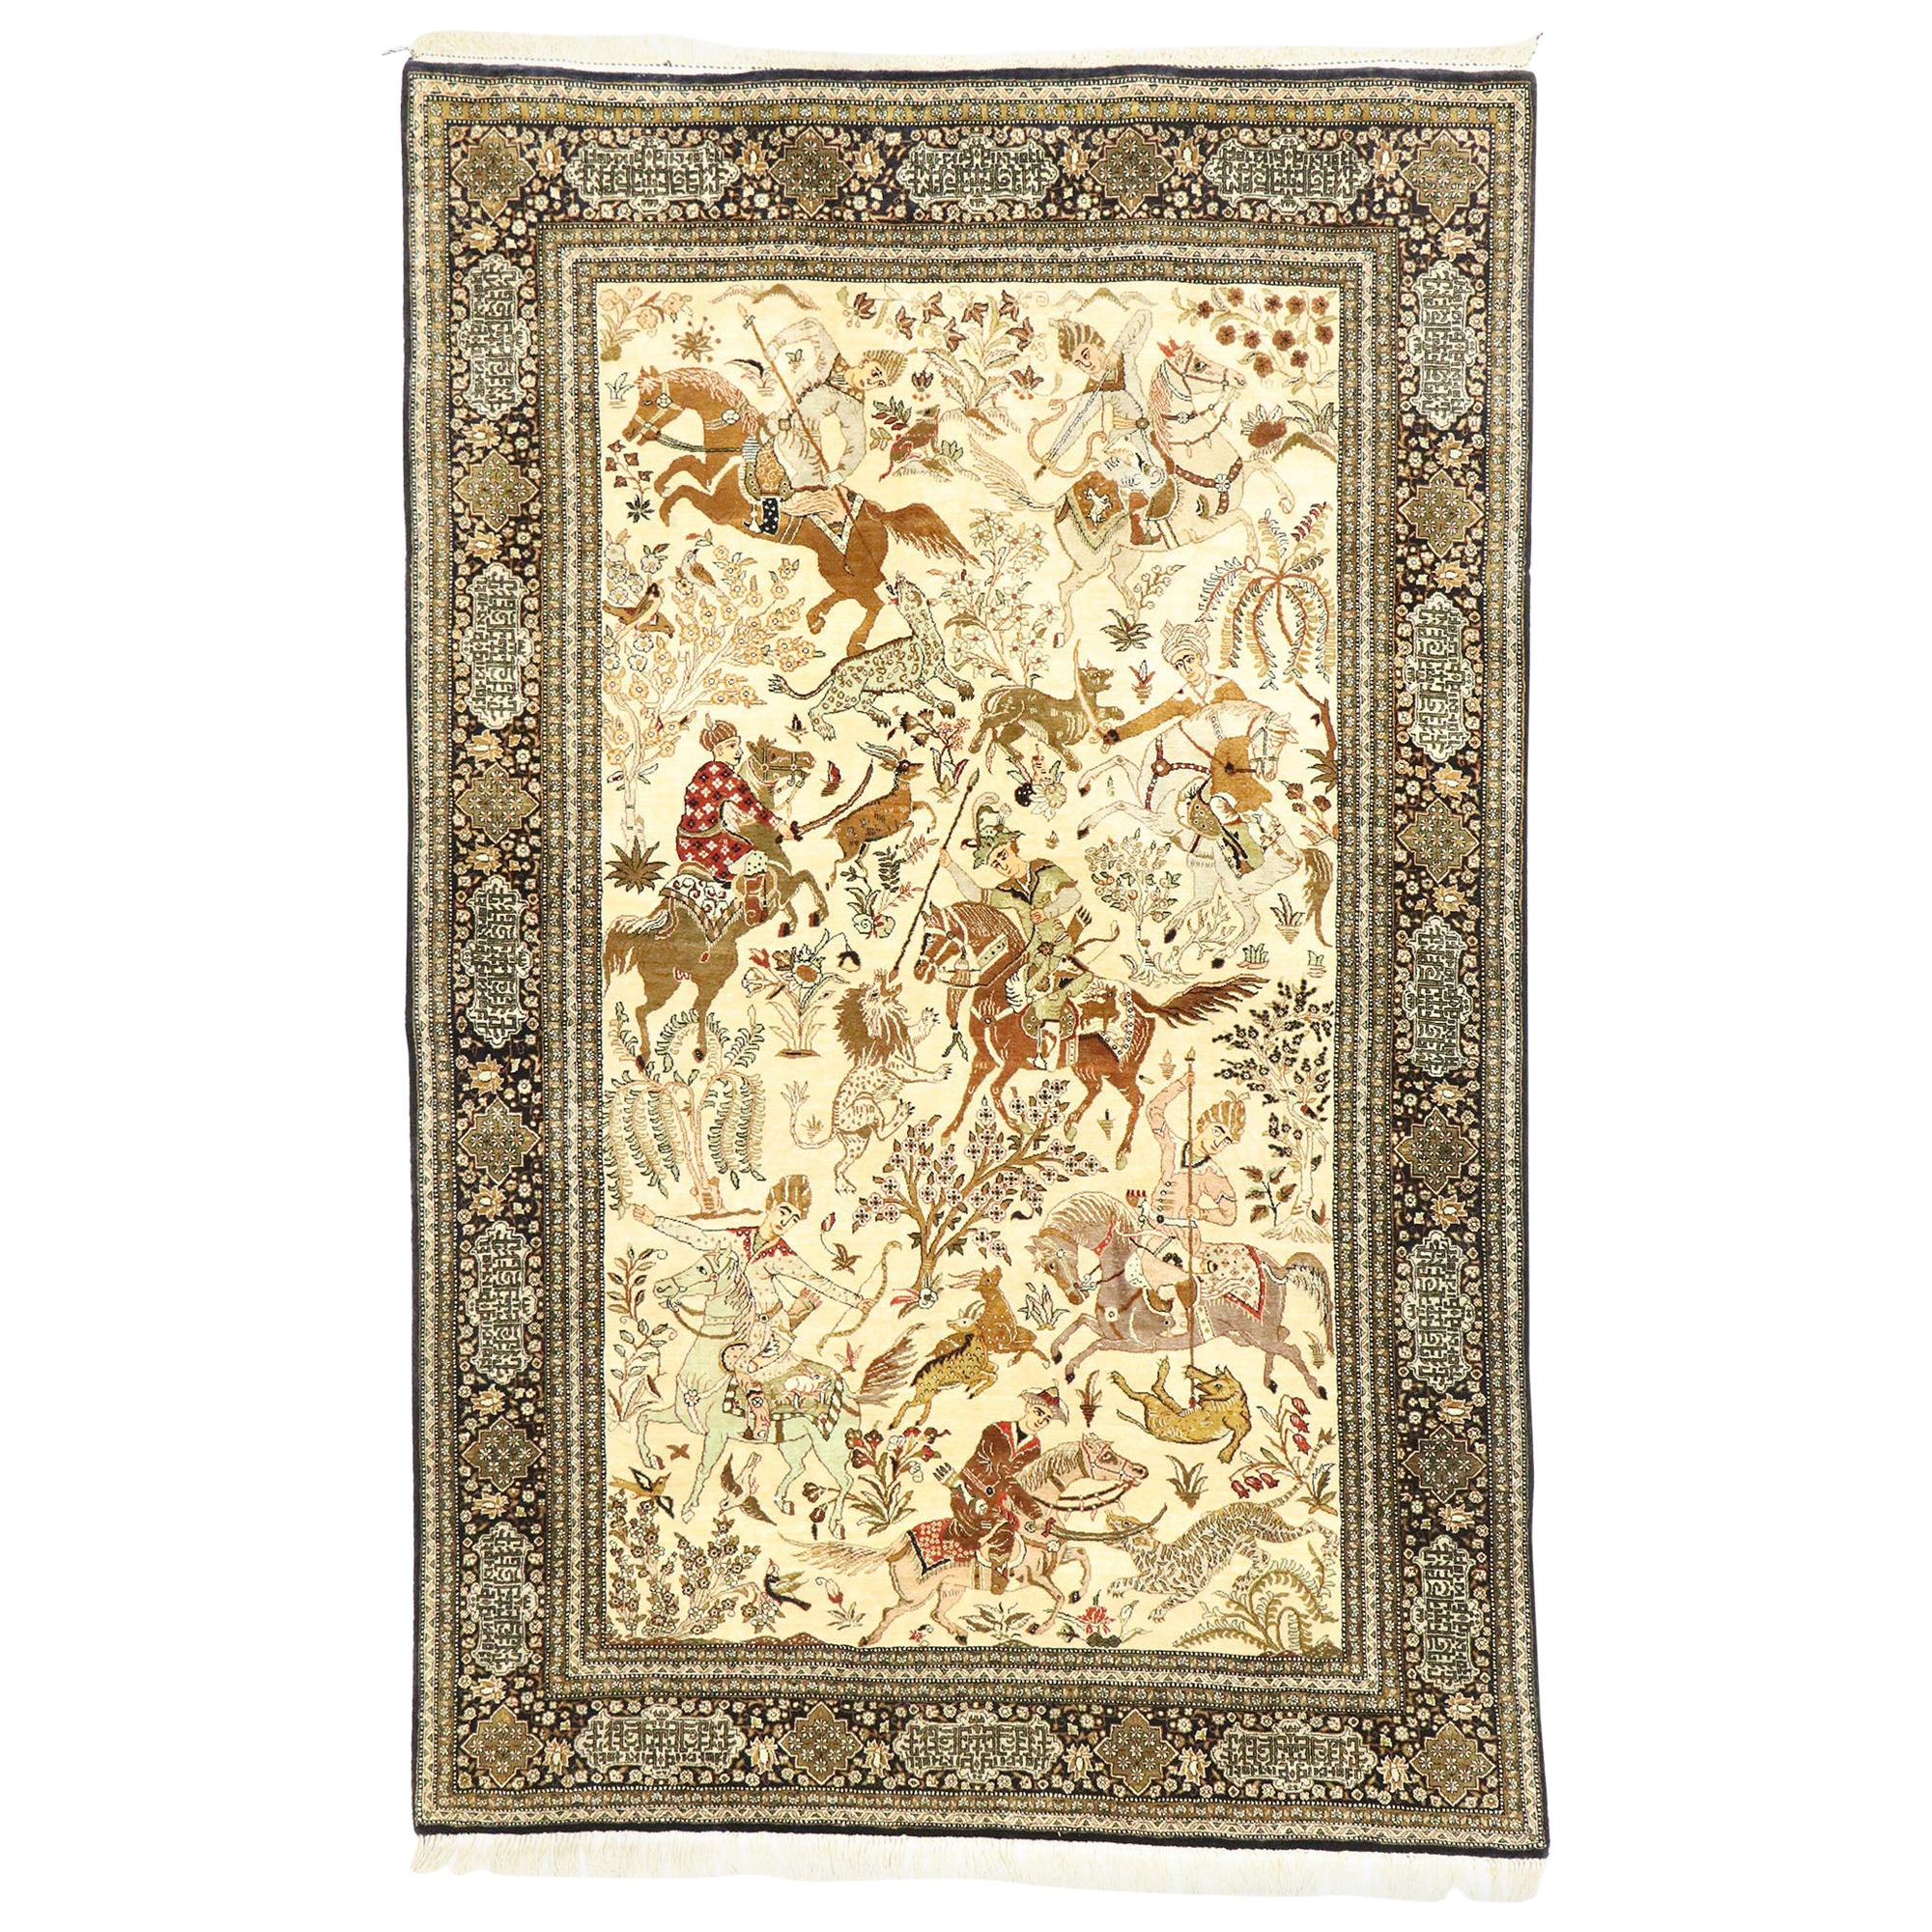 Yilong 8'x10' Hand Knotted Oriental Qum Persian Silk Rug Four Season Traditional Hand Made Carpet 8-Feet-by-10-Feet, Ivory 1256